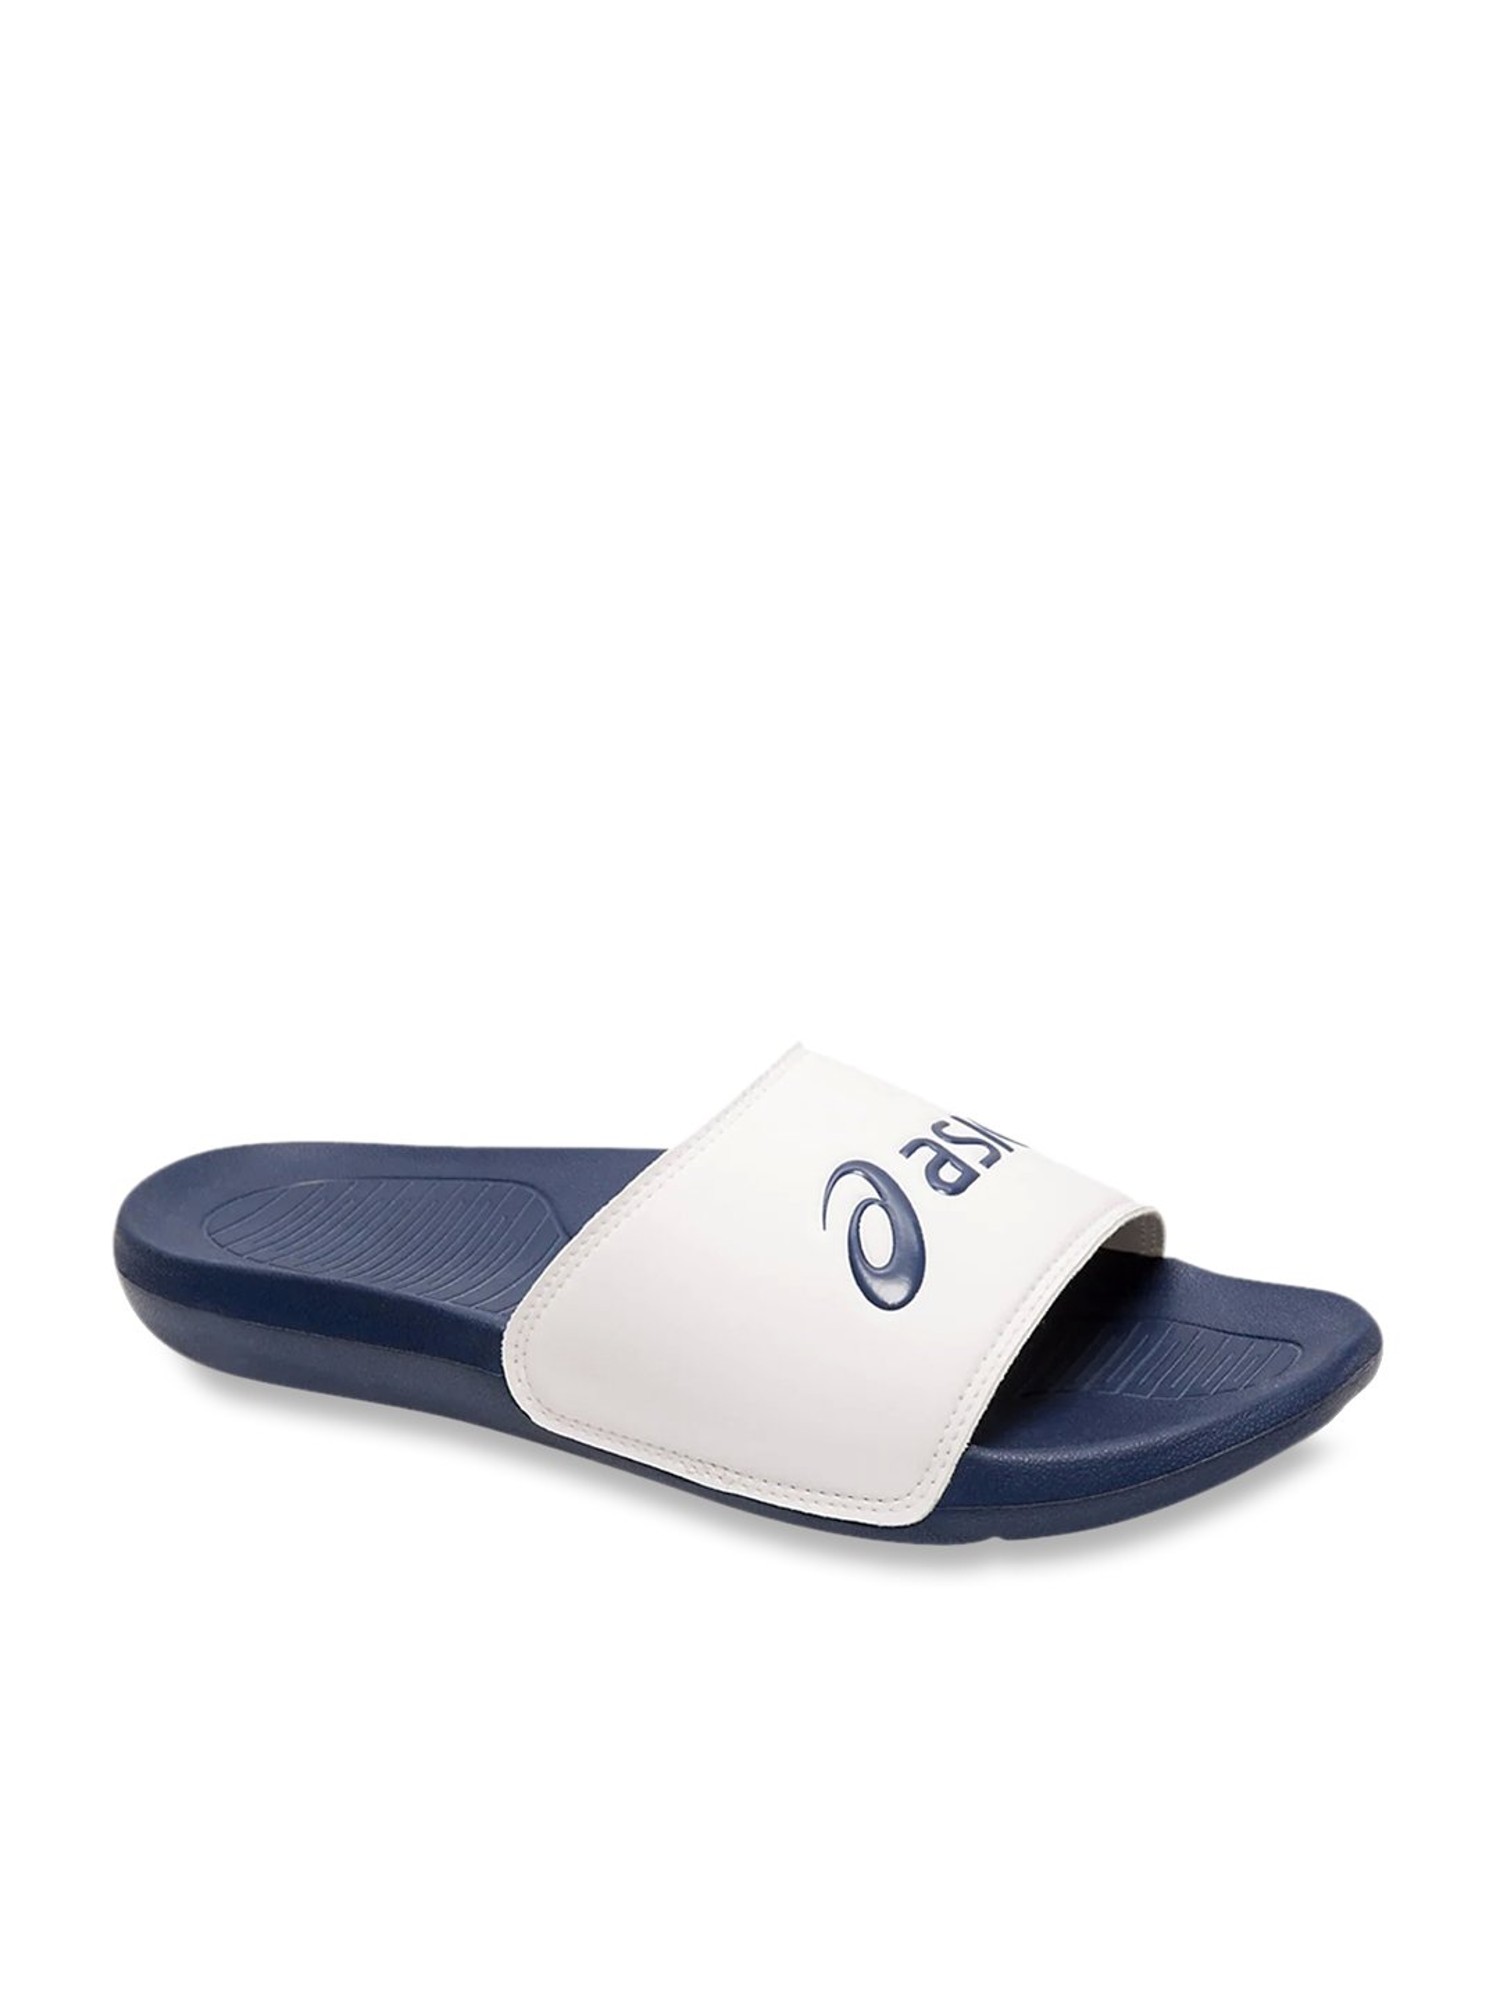 Buy Asics AS003 White Casual Sandals for Men at Best Price @ Tata CLiQ